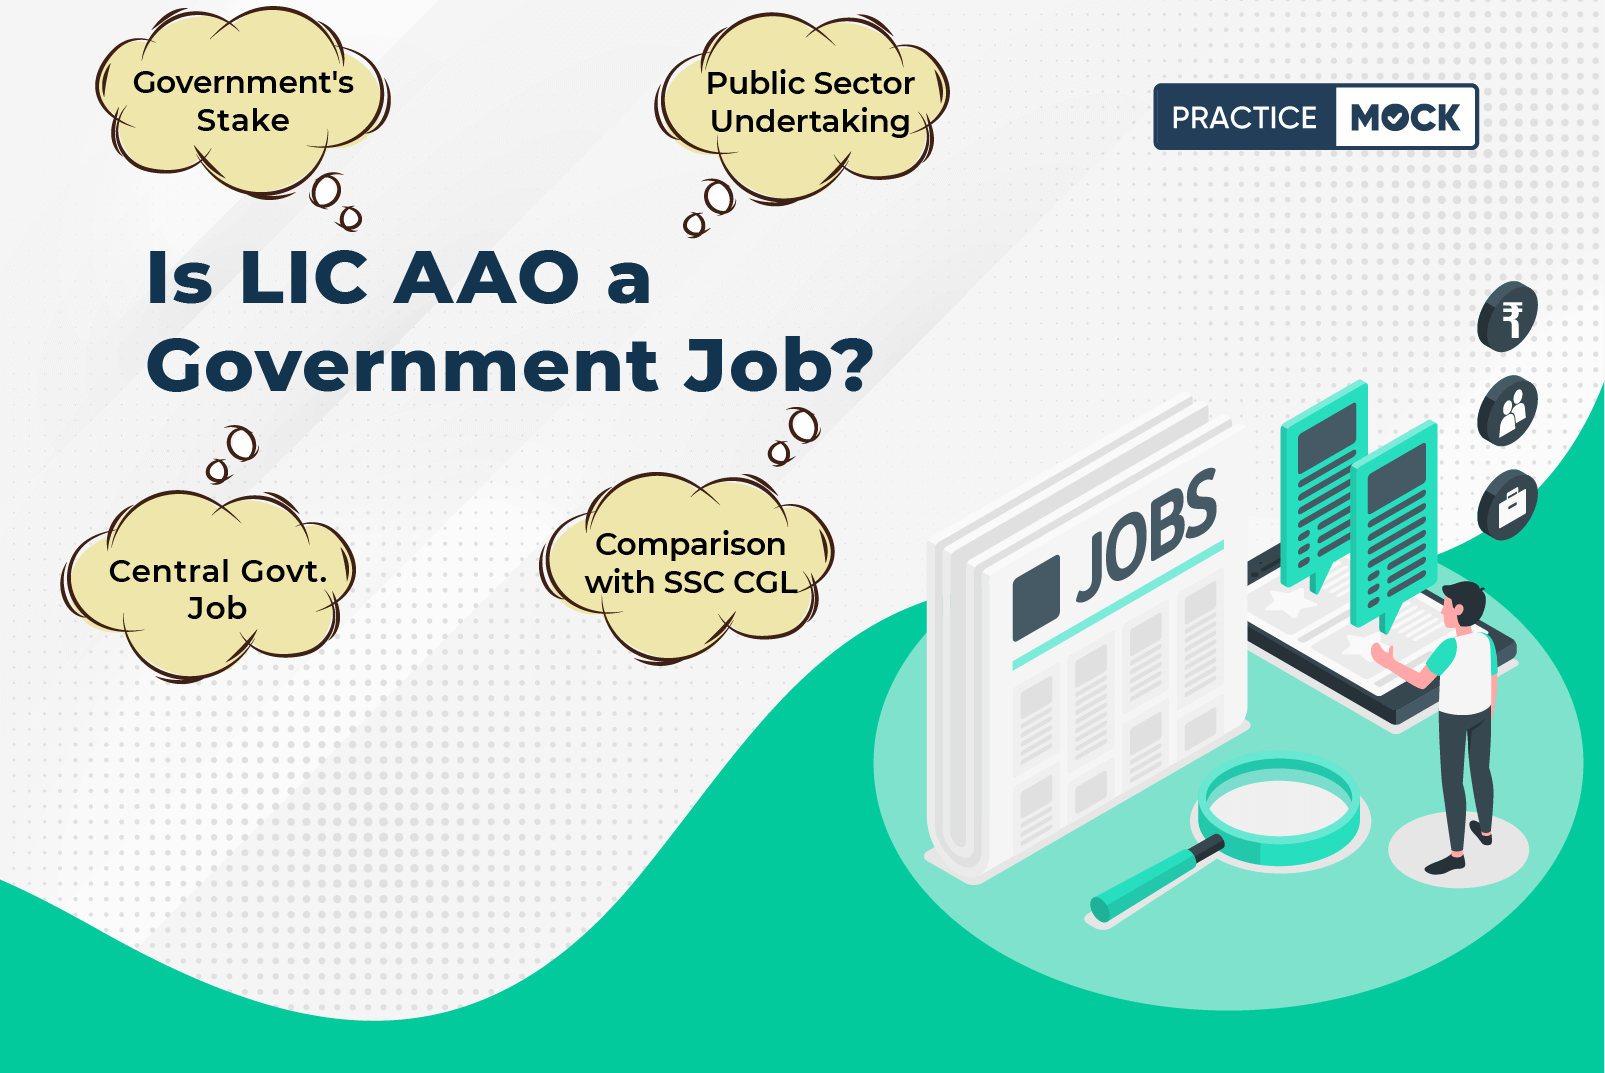 Is LIC AAO a Government Job